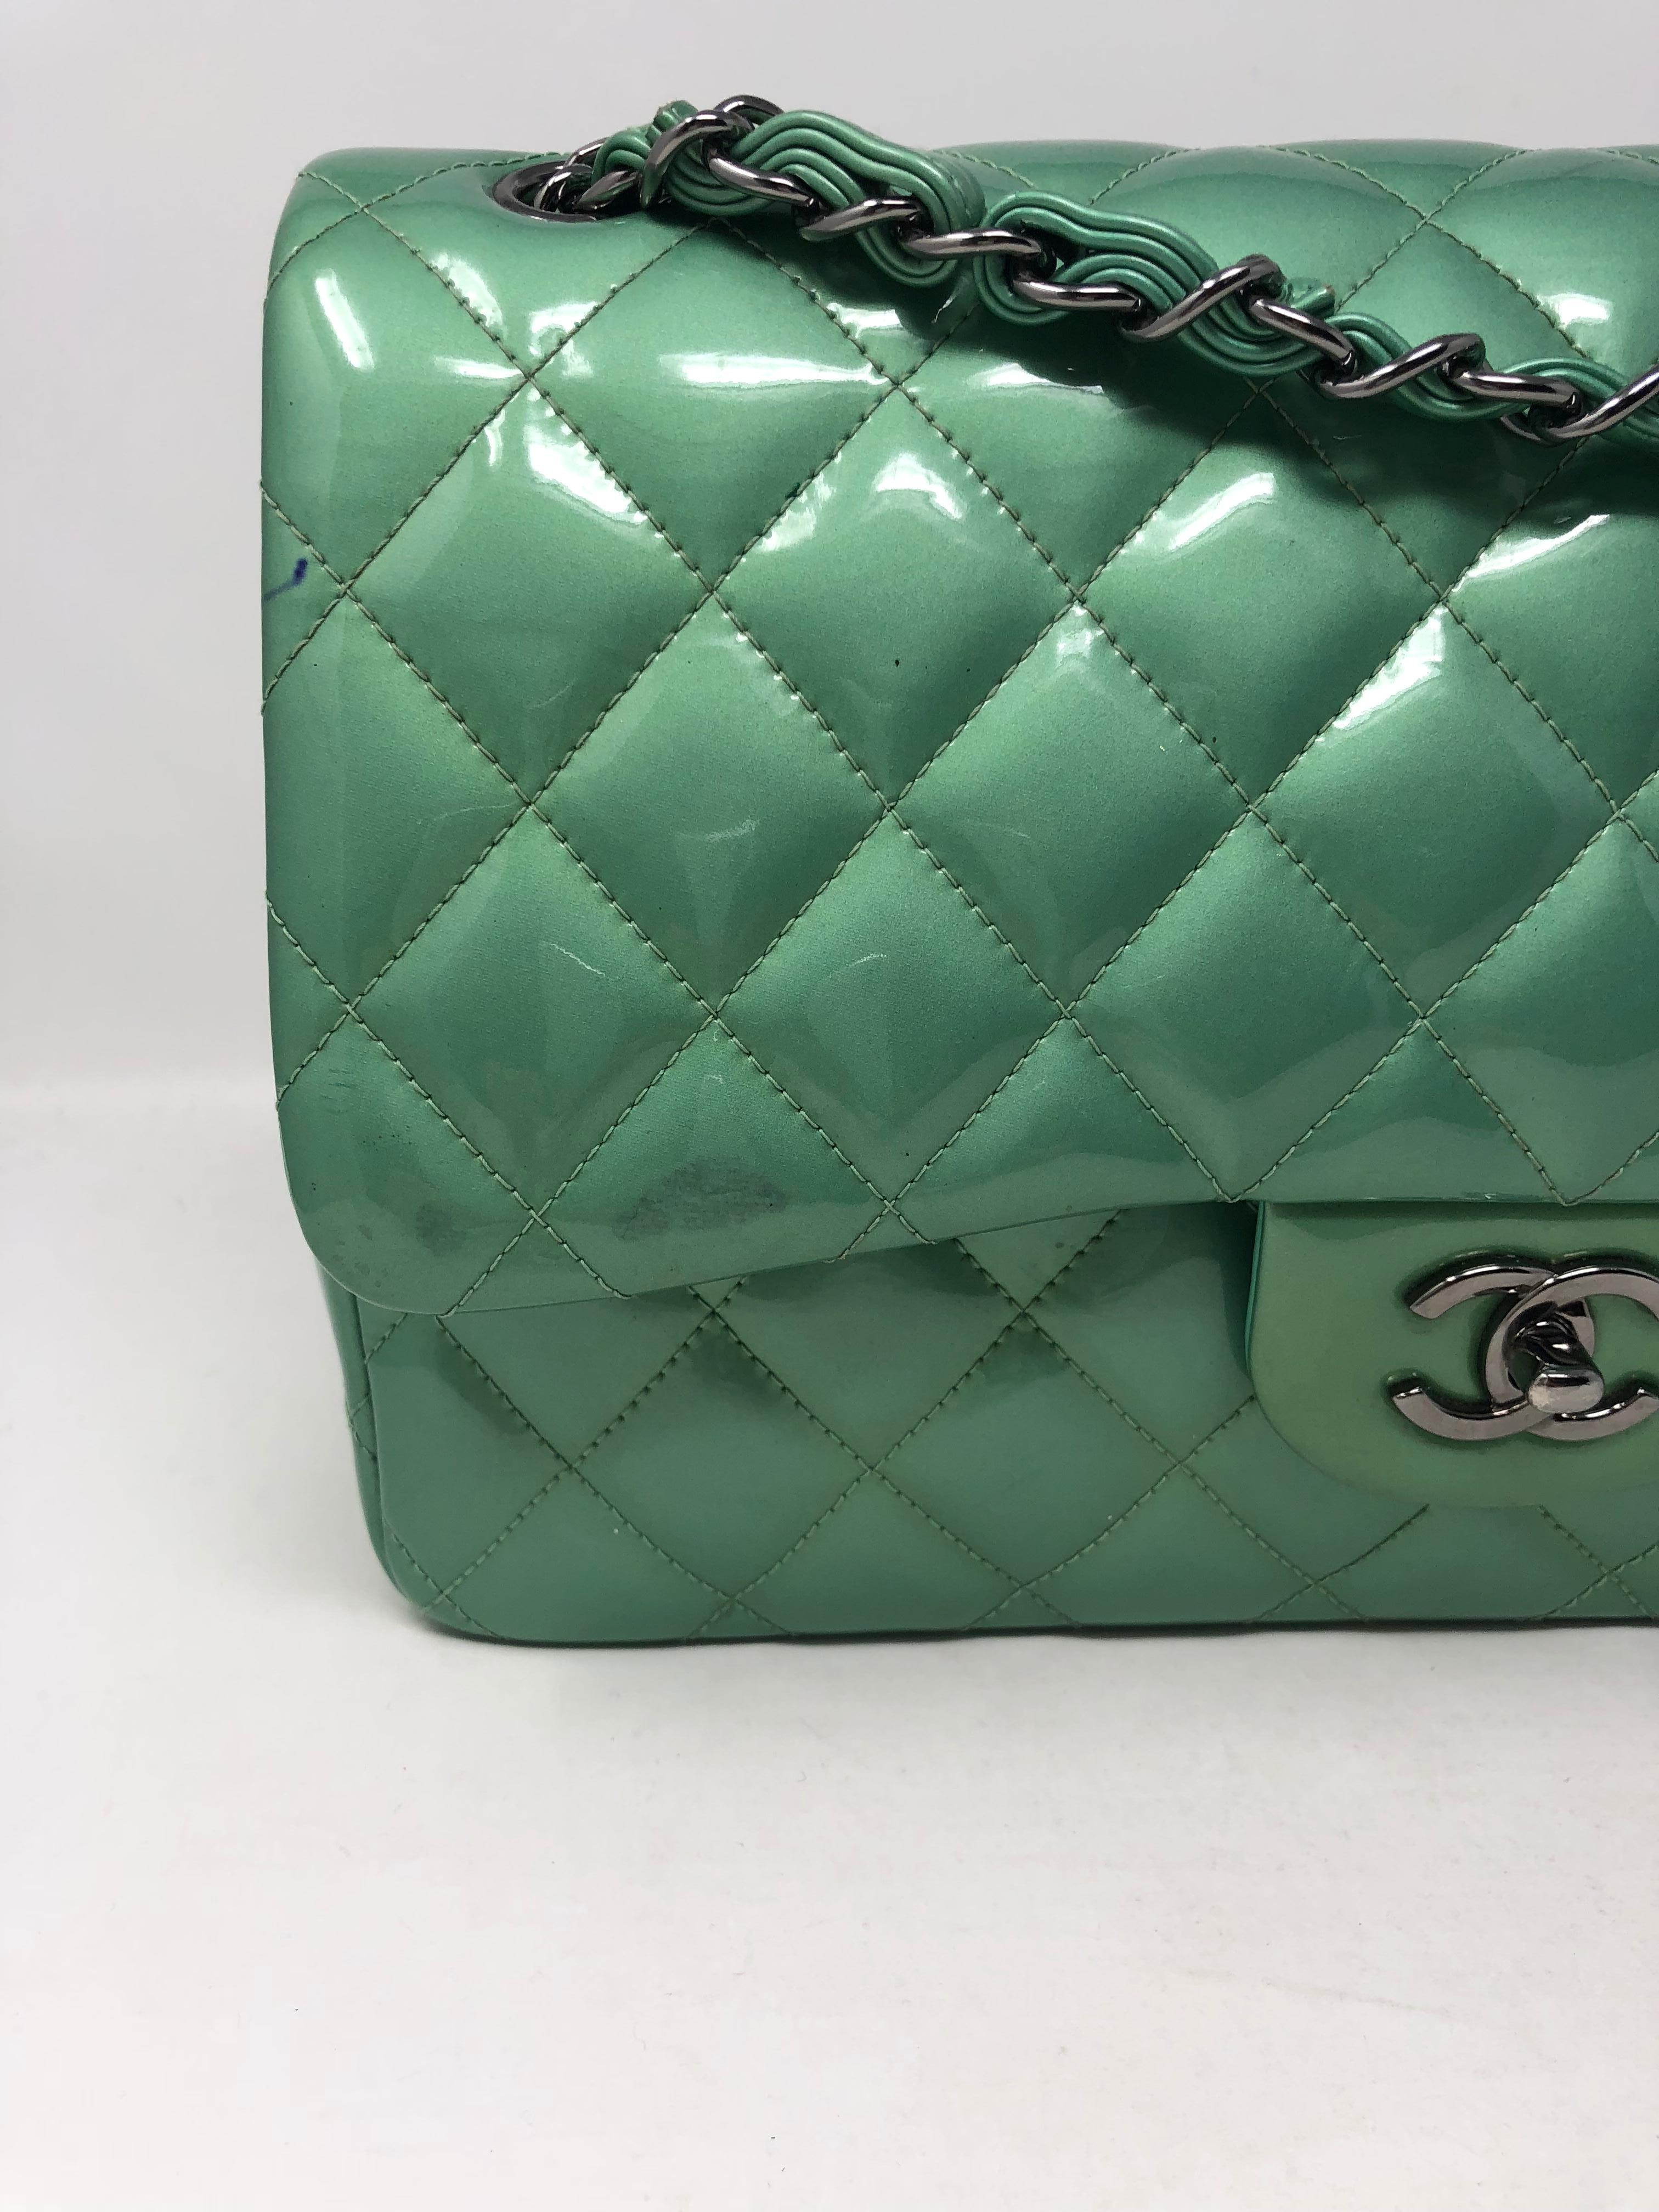 Chanel Menthe green patent leather Jumbo double flap bag with silver hardware. Stunning color in durable patent leather. Give your wardrobe a Pop of color this season. Guaranteed authentic. 